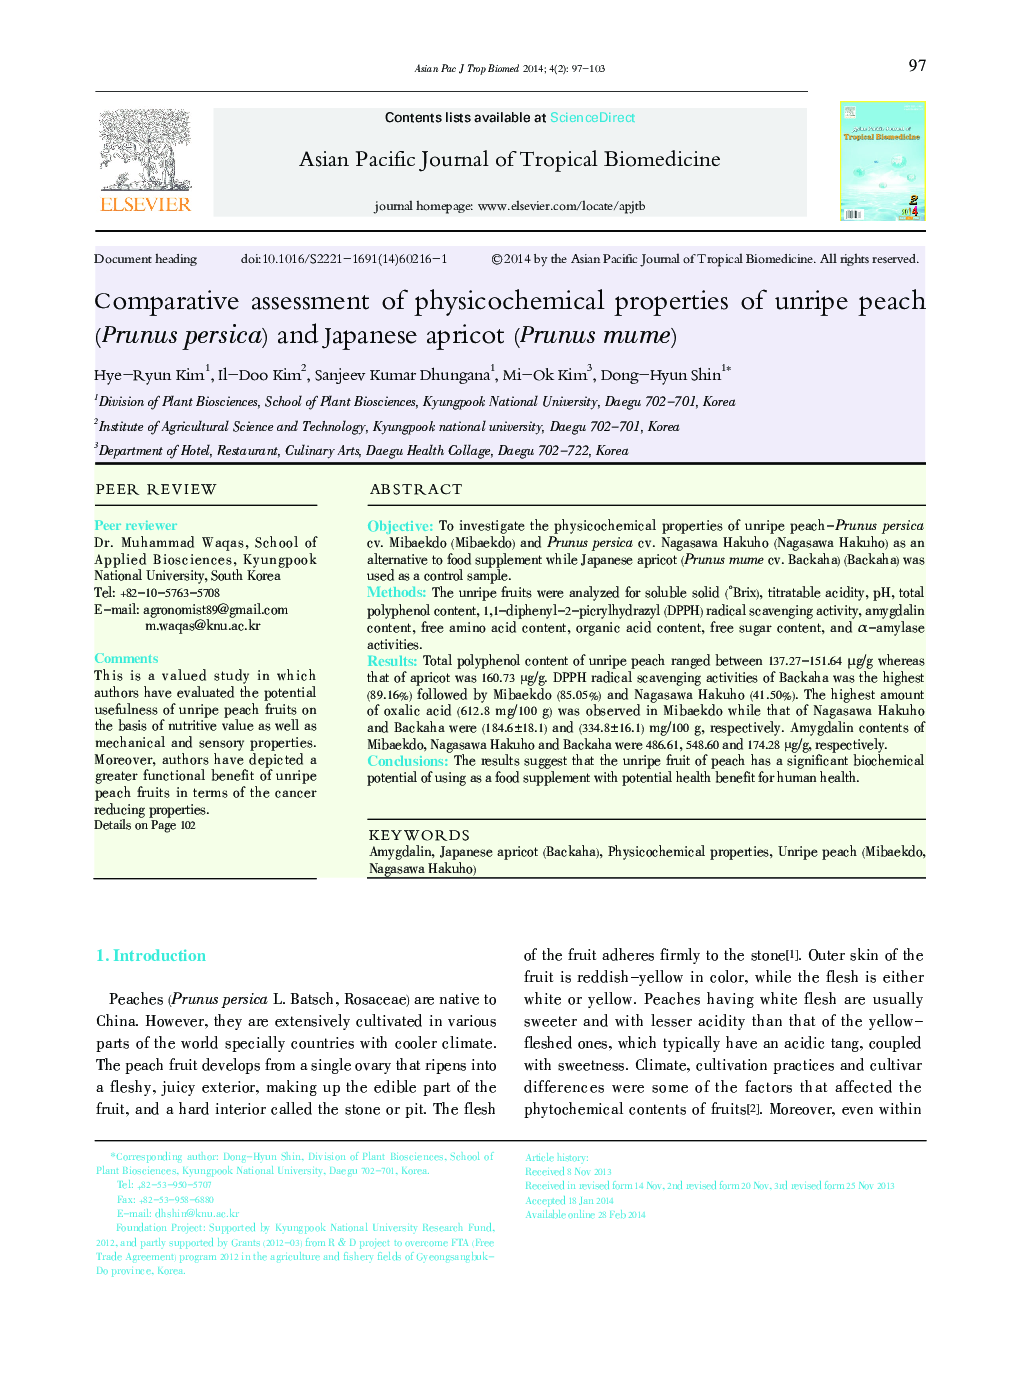 Comparative assessment of physicochemical properties of unripe peach (Prunus persica) and Japanese apricot (Prunus mume) 